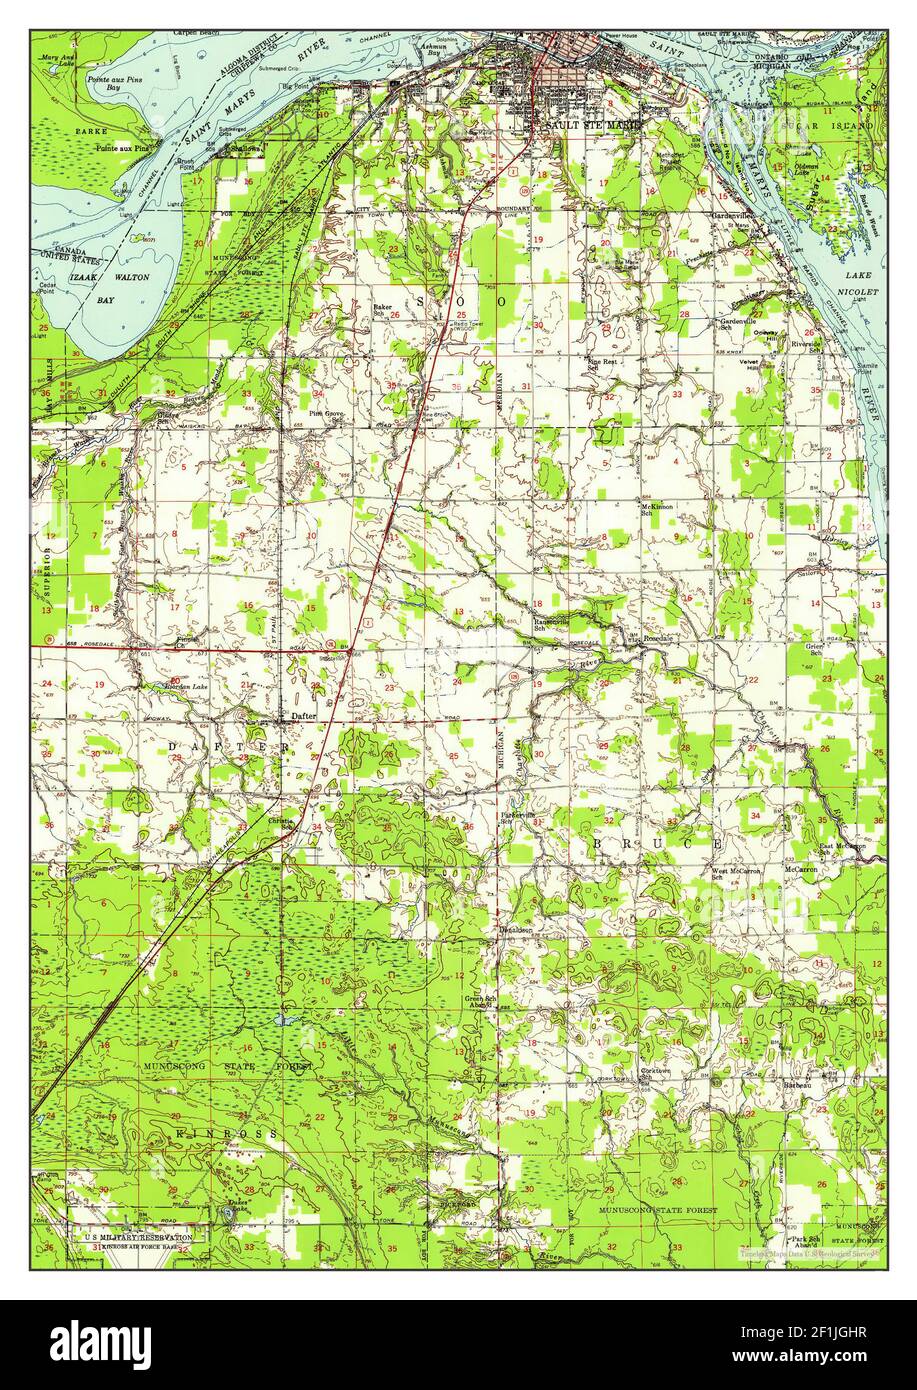 Sault Ste Marie, Michigan, map 1951, 1:62500, United States of America by Timeless Maps, data U.S. Geological Survey Stock Photo